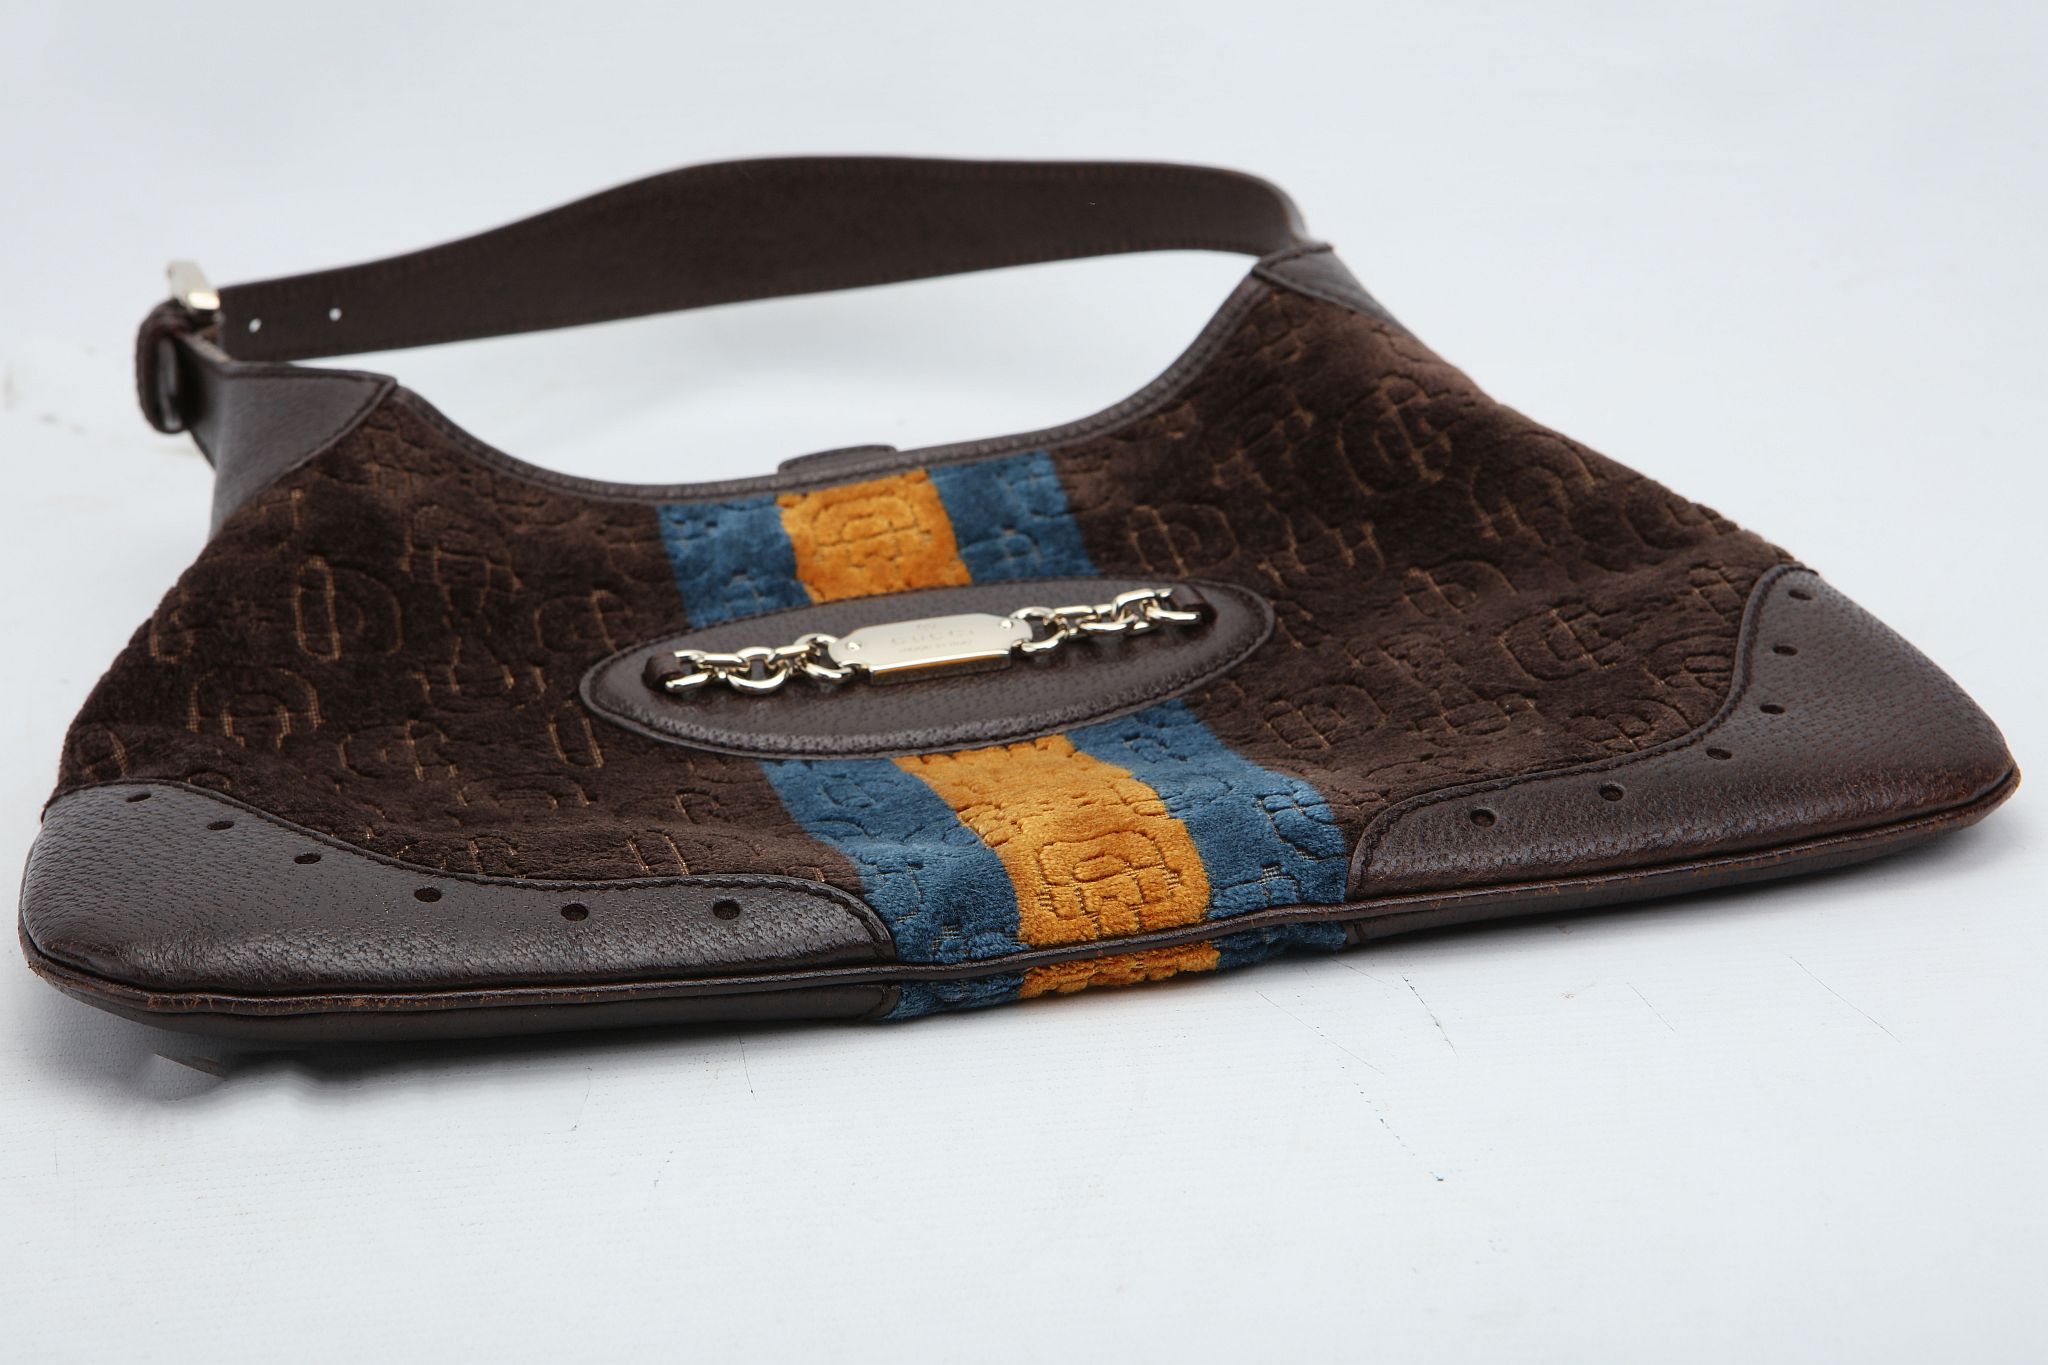 GUCCI JACKIE HANDBAG, brown velvet with yellow and blue central stripe, leather trim, 34cm wide, - Image 5 of 12